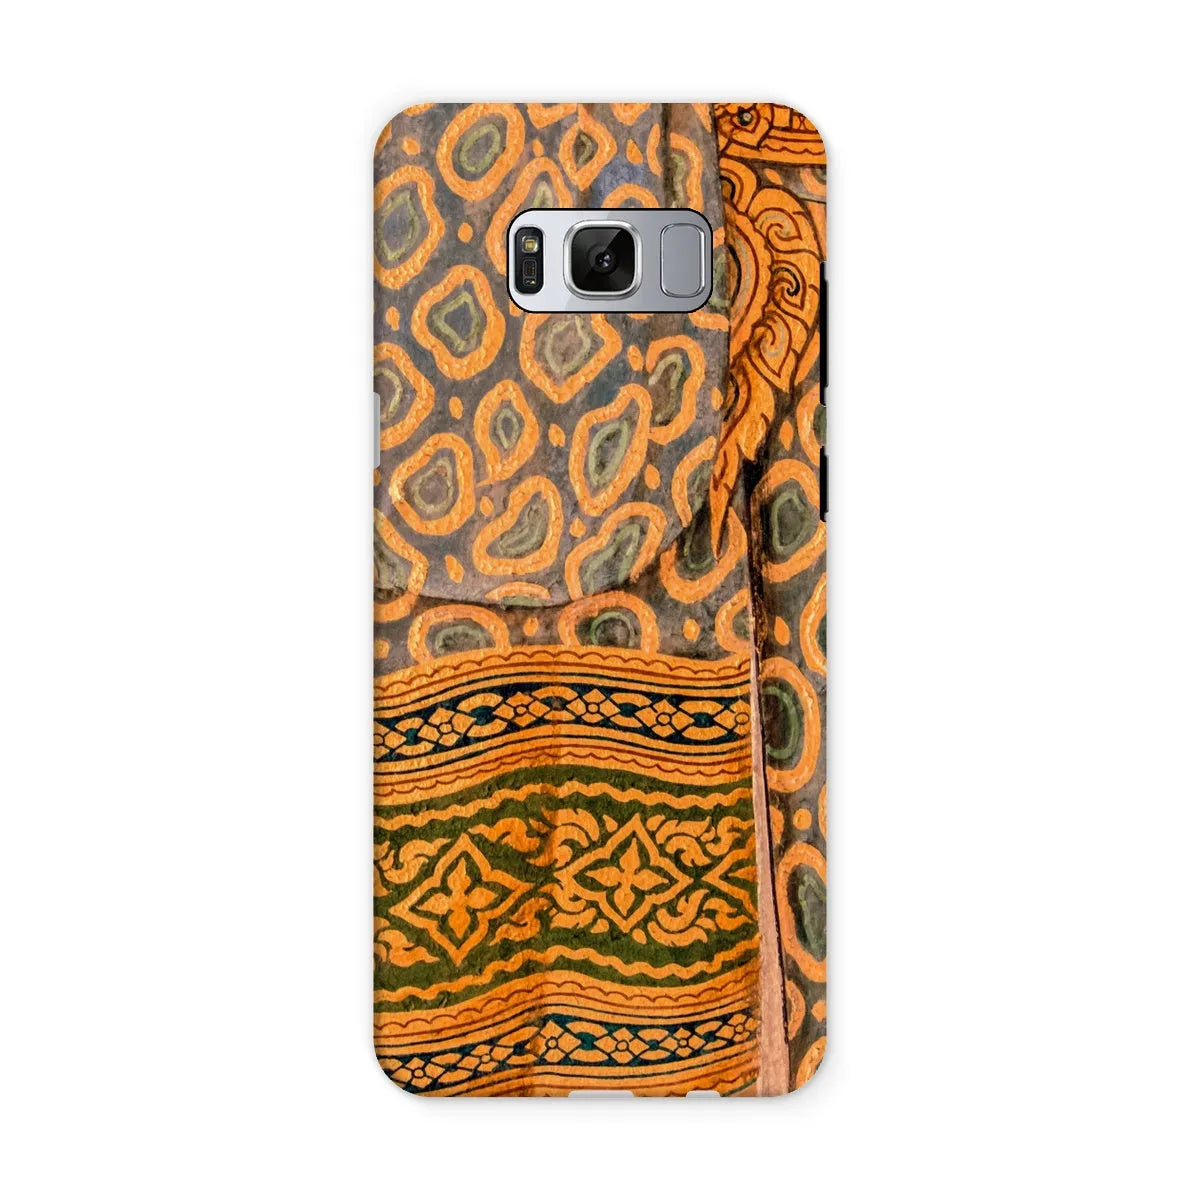 Lady In Waiting - Thai Aesthetic Art Phone Case - Samsung Galaxy S8 / Matte - Mobile Phone Cases - Aesthetic Art